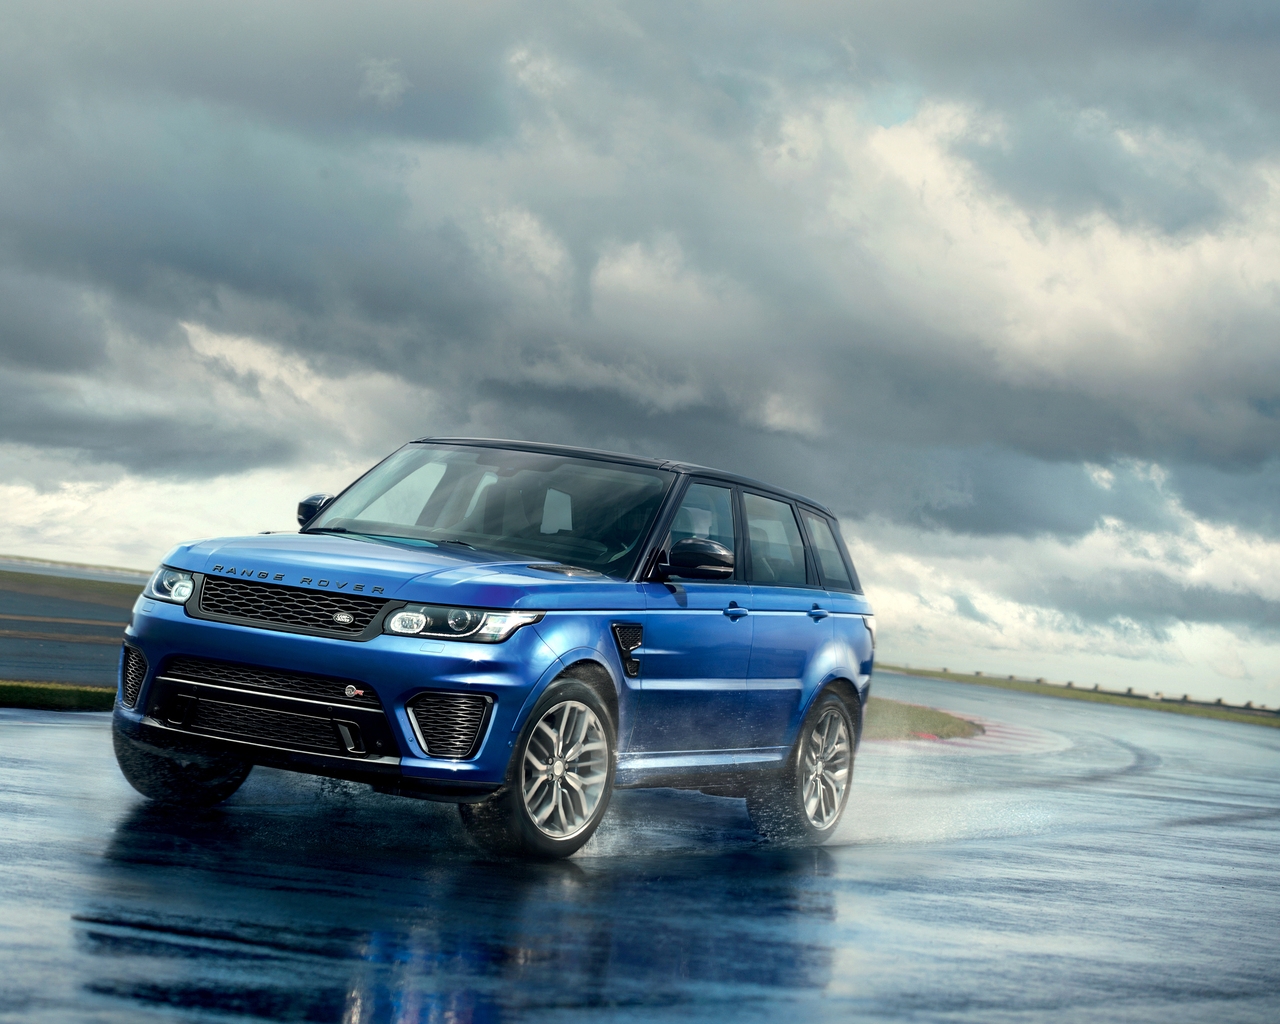 Gorgeous Blue Range Rover for 1280 x 1024 resolution